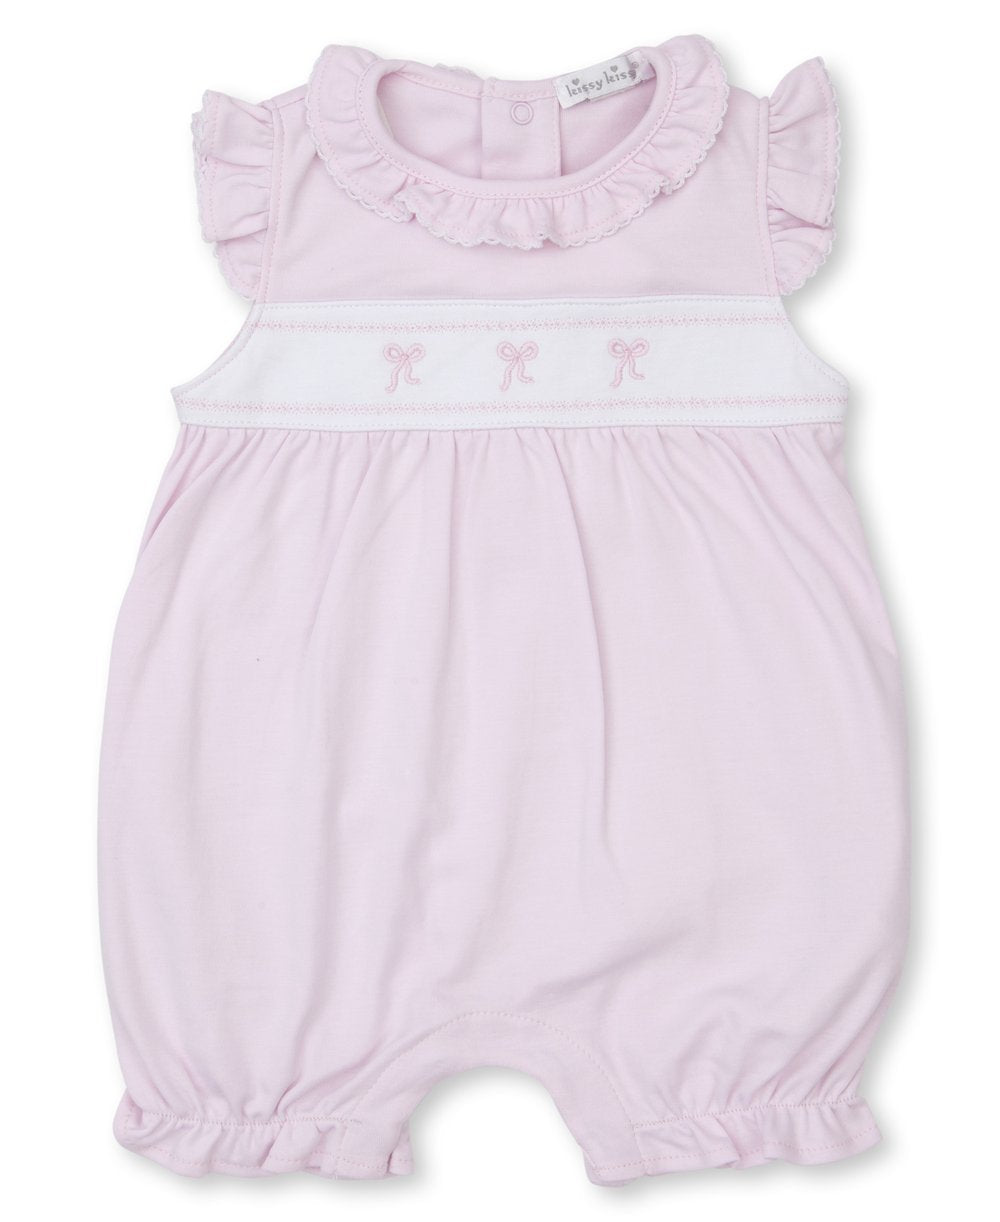 Classic Treasures Bows Embroidered Playsuit